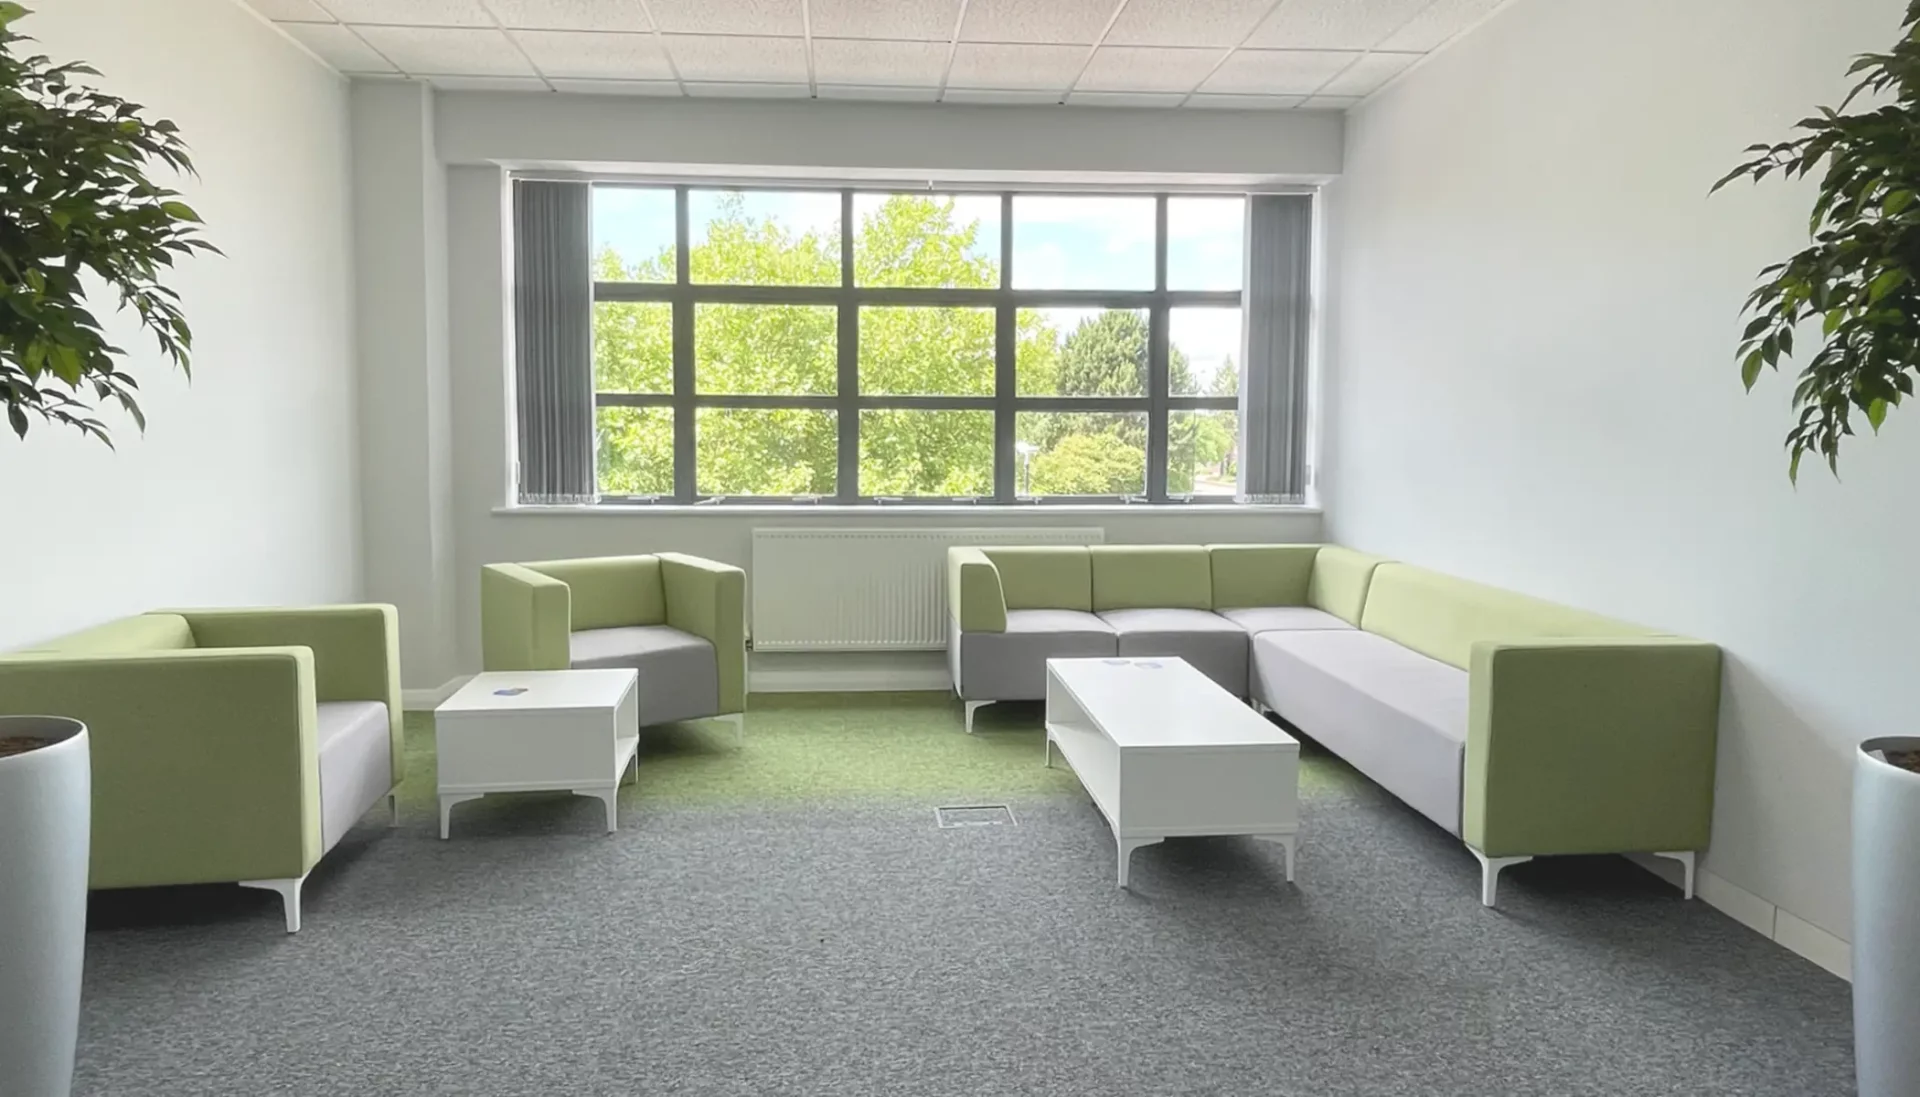 Mf soft seating scaled from aci